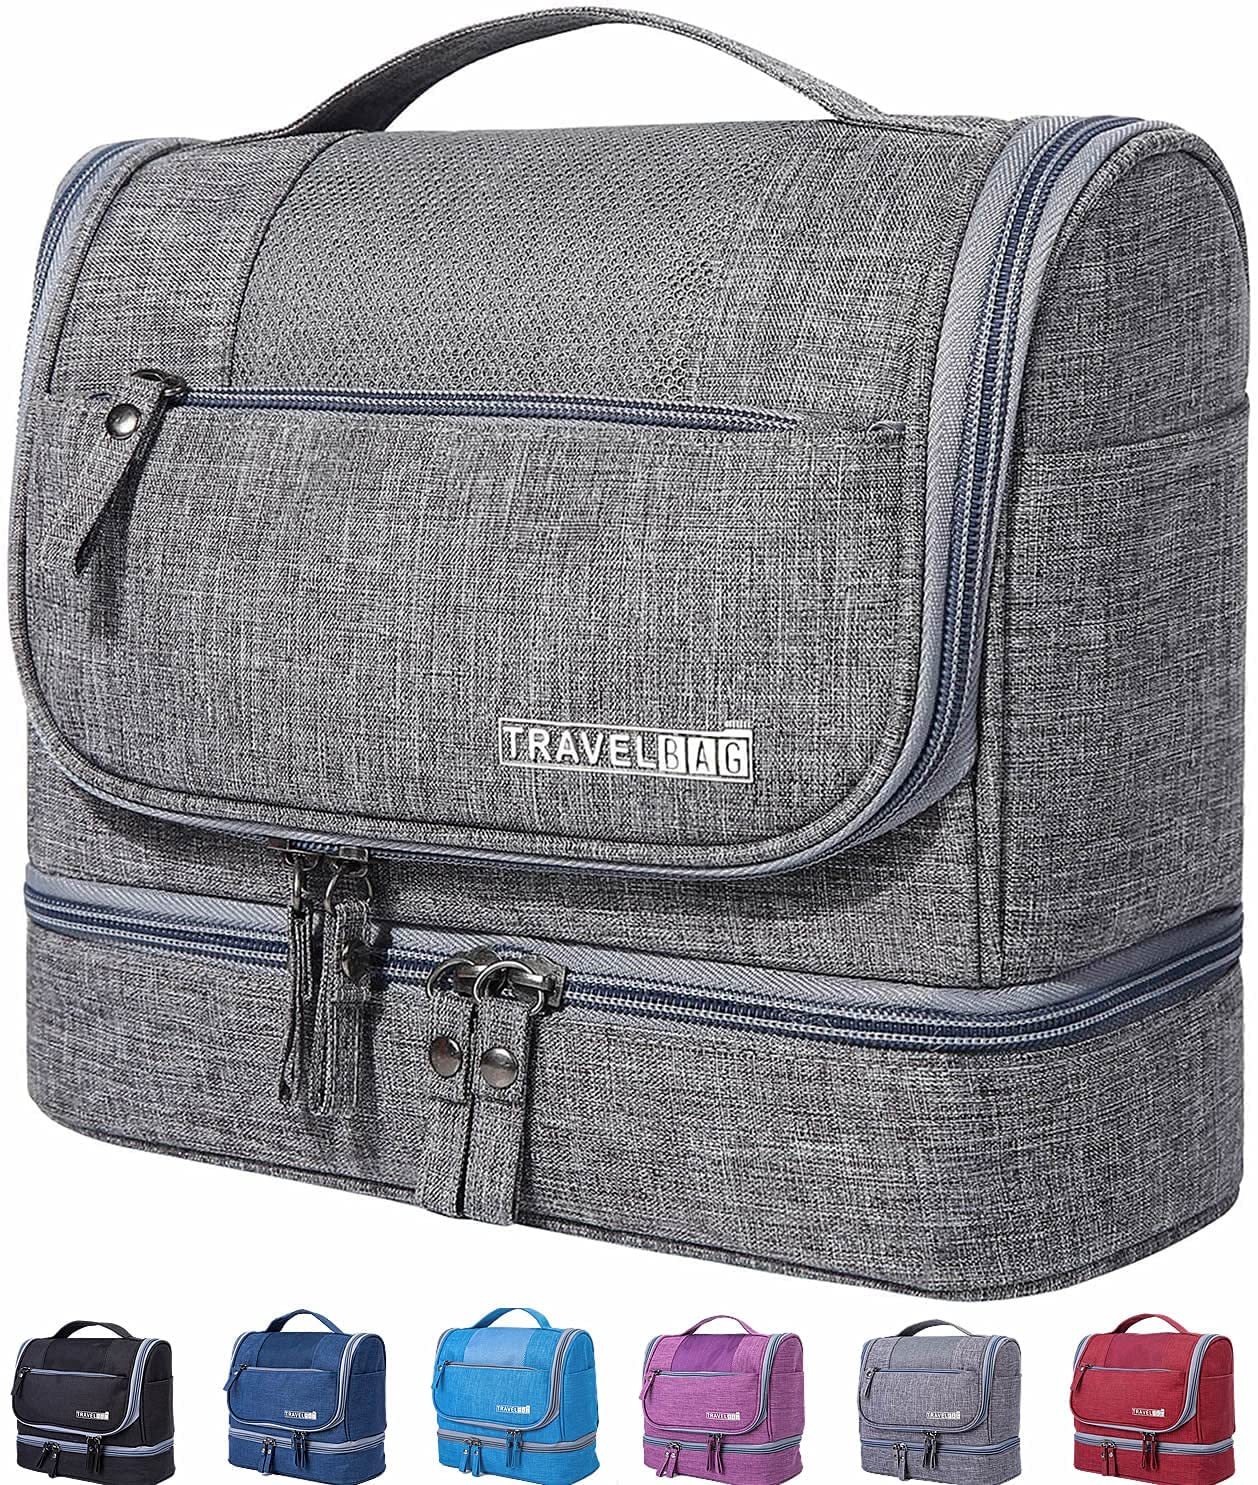 Large Hanging Travel Toiletry Bag Large Capacity Cosmetic Bag for Men and Women Waterproof Makeup Pouch Organizer with Hook Zipper Dopp Kit for Toiletries, Accessories